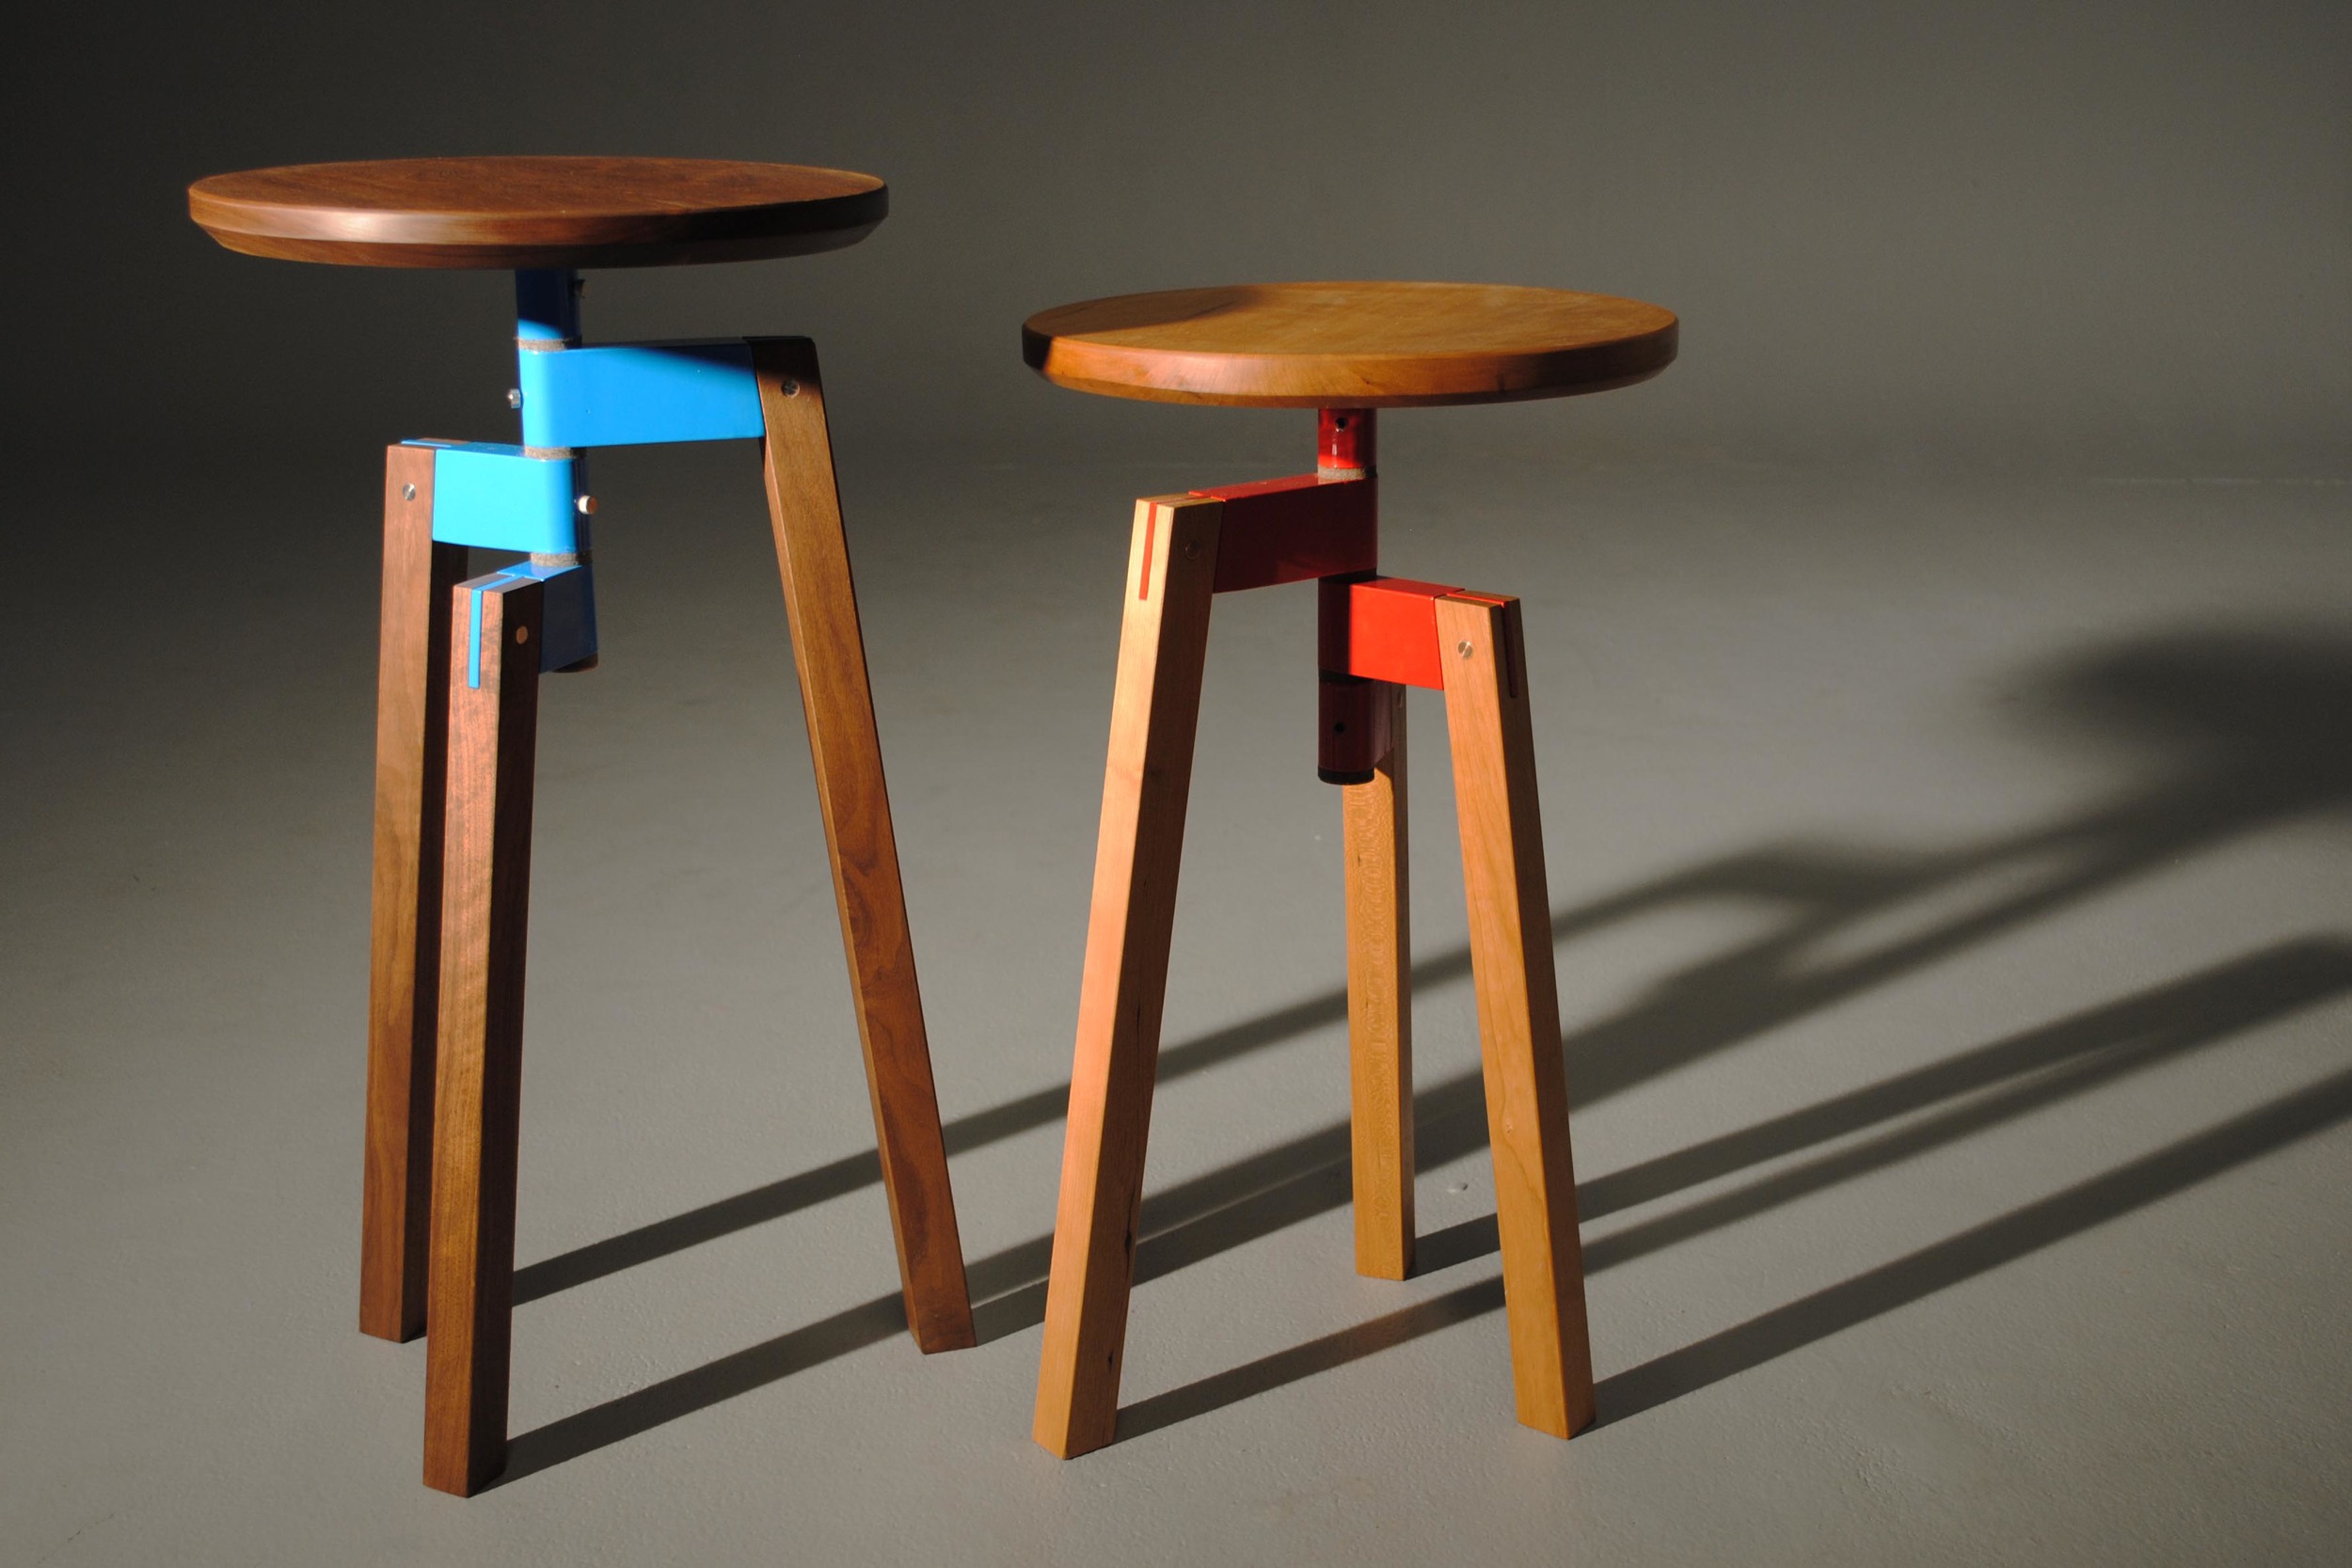 Collapsible stool/tables